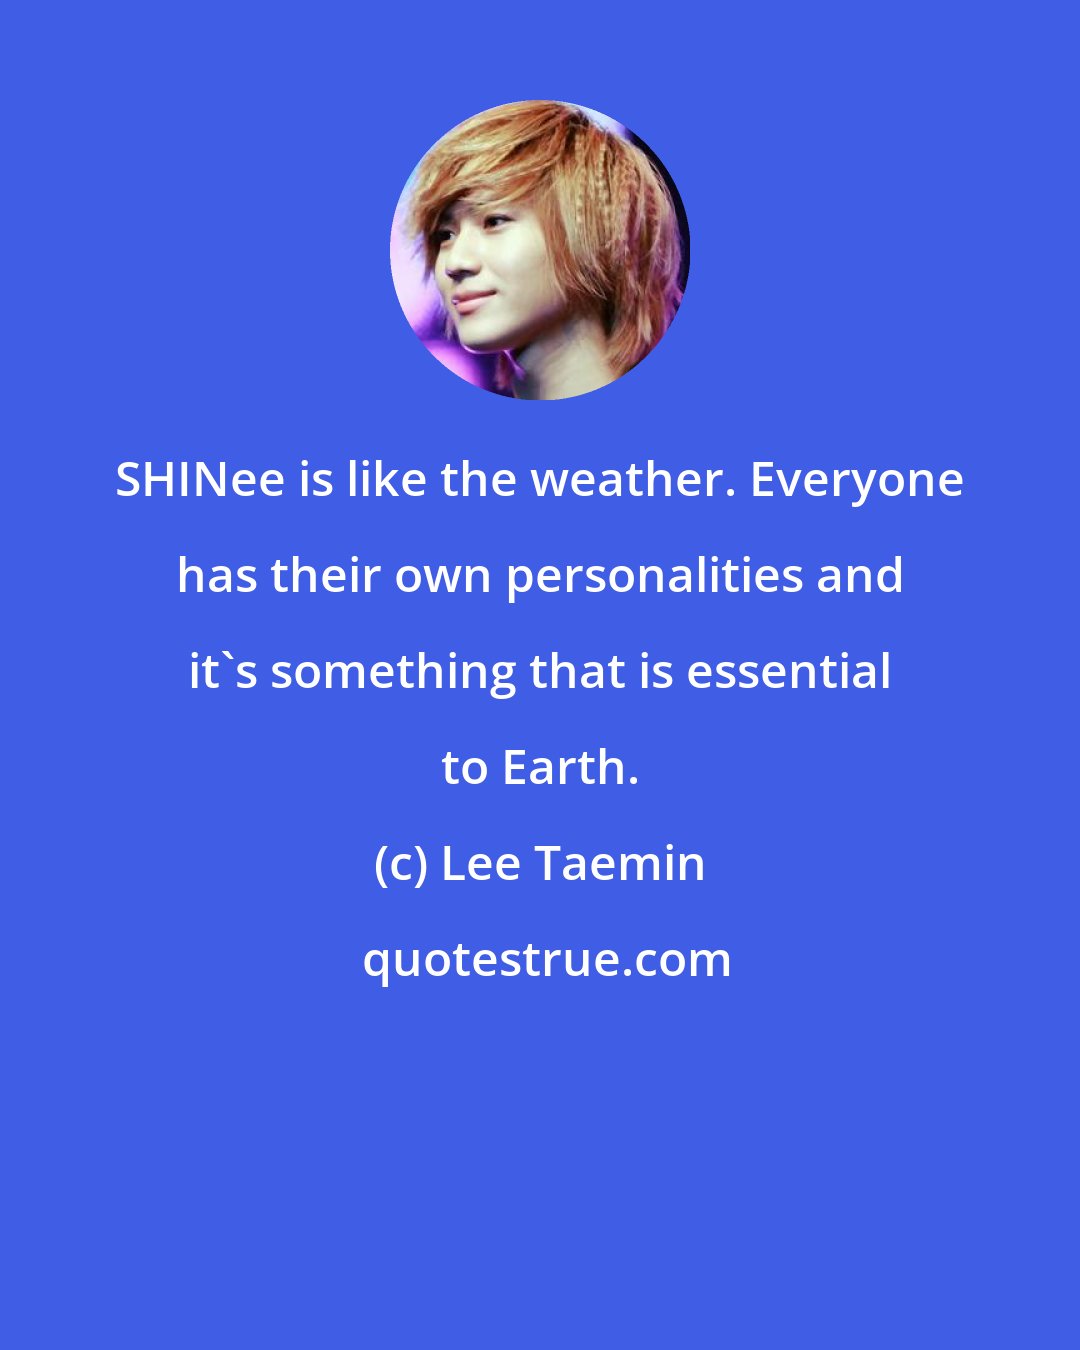 Lee Taemin: SHINee is like the weather. Everyone has their own personalities and it's something that is essential to Earth.